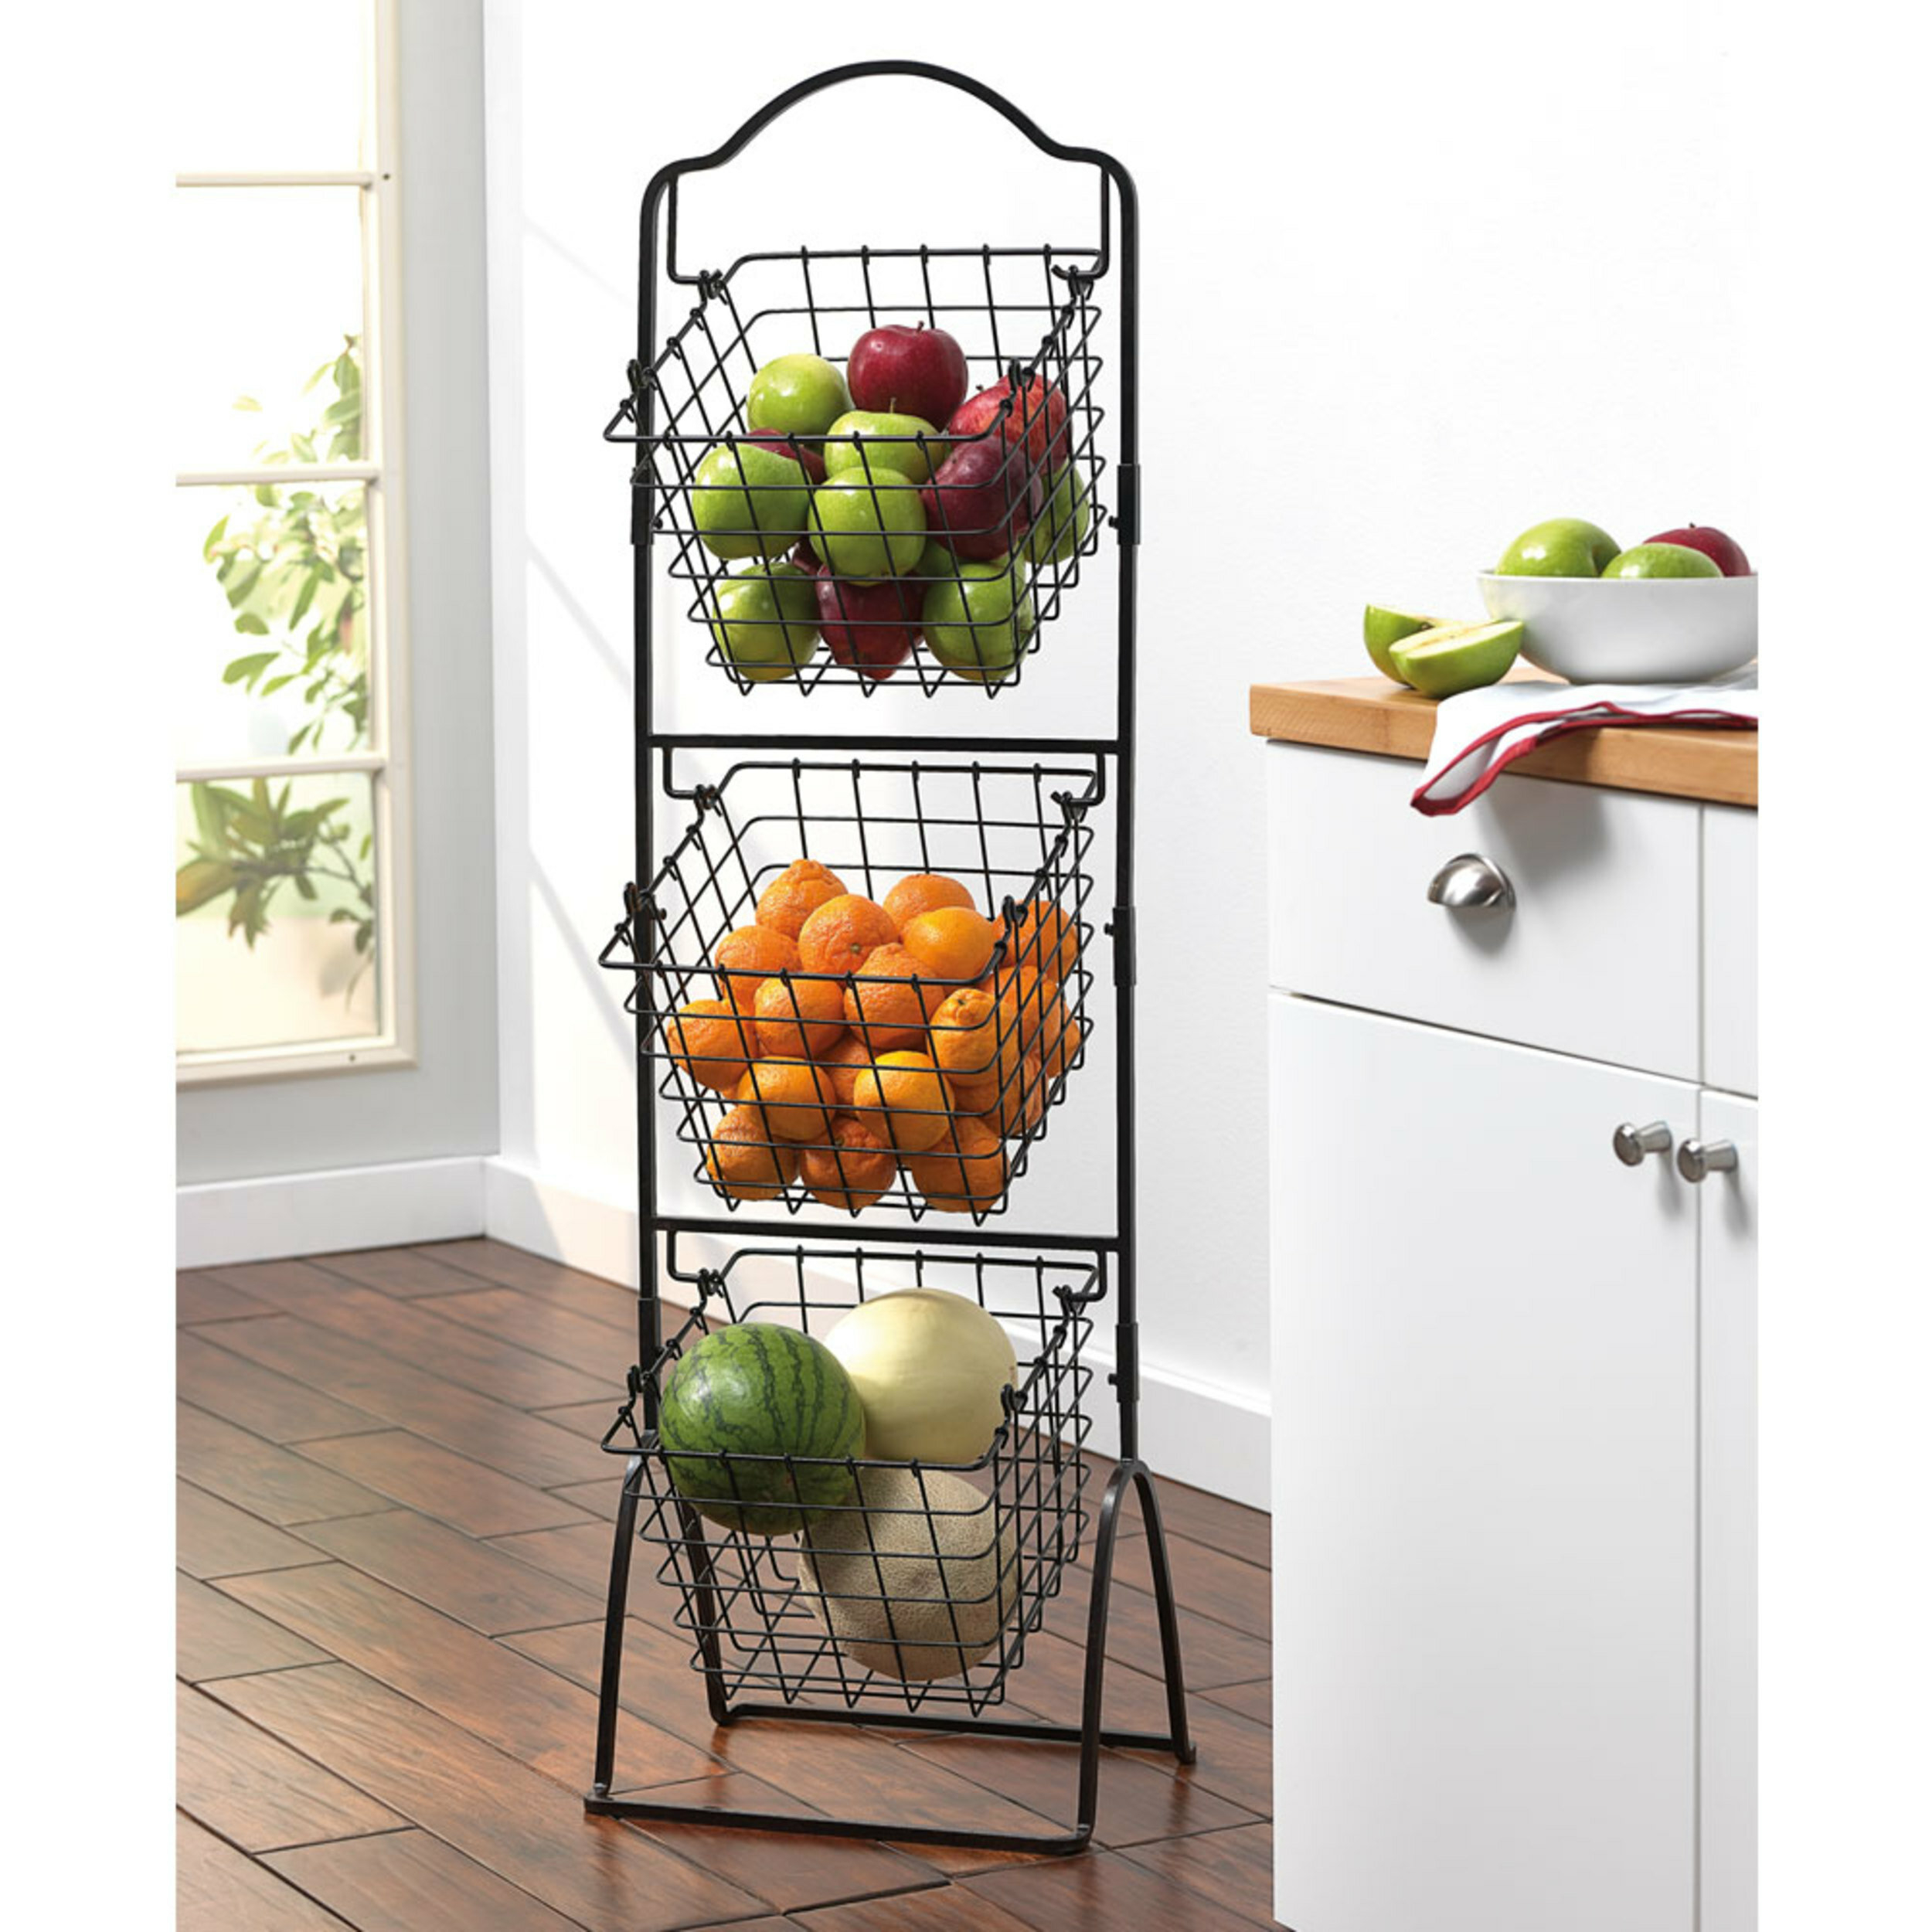 Details about   3 Tier Hanging Metal Baskets 